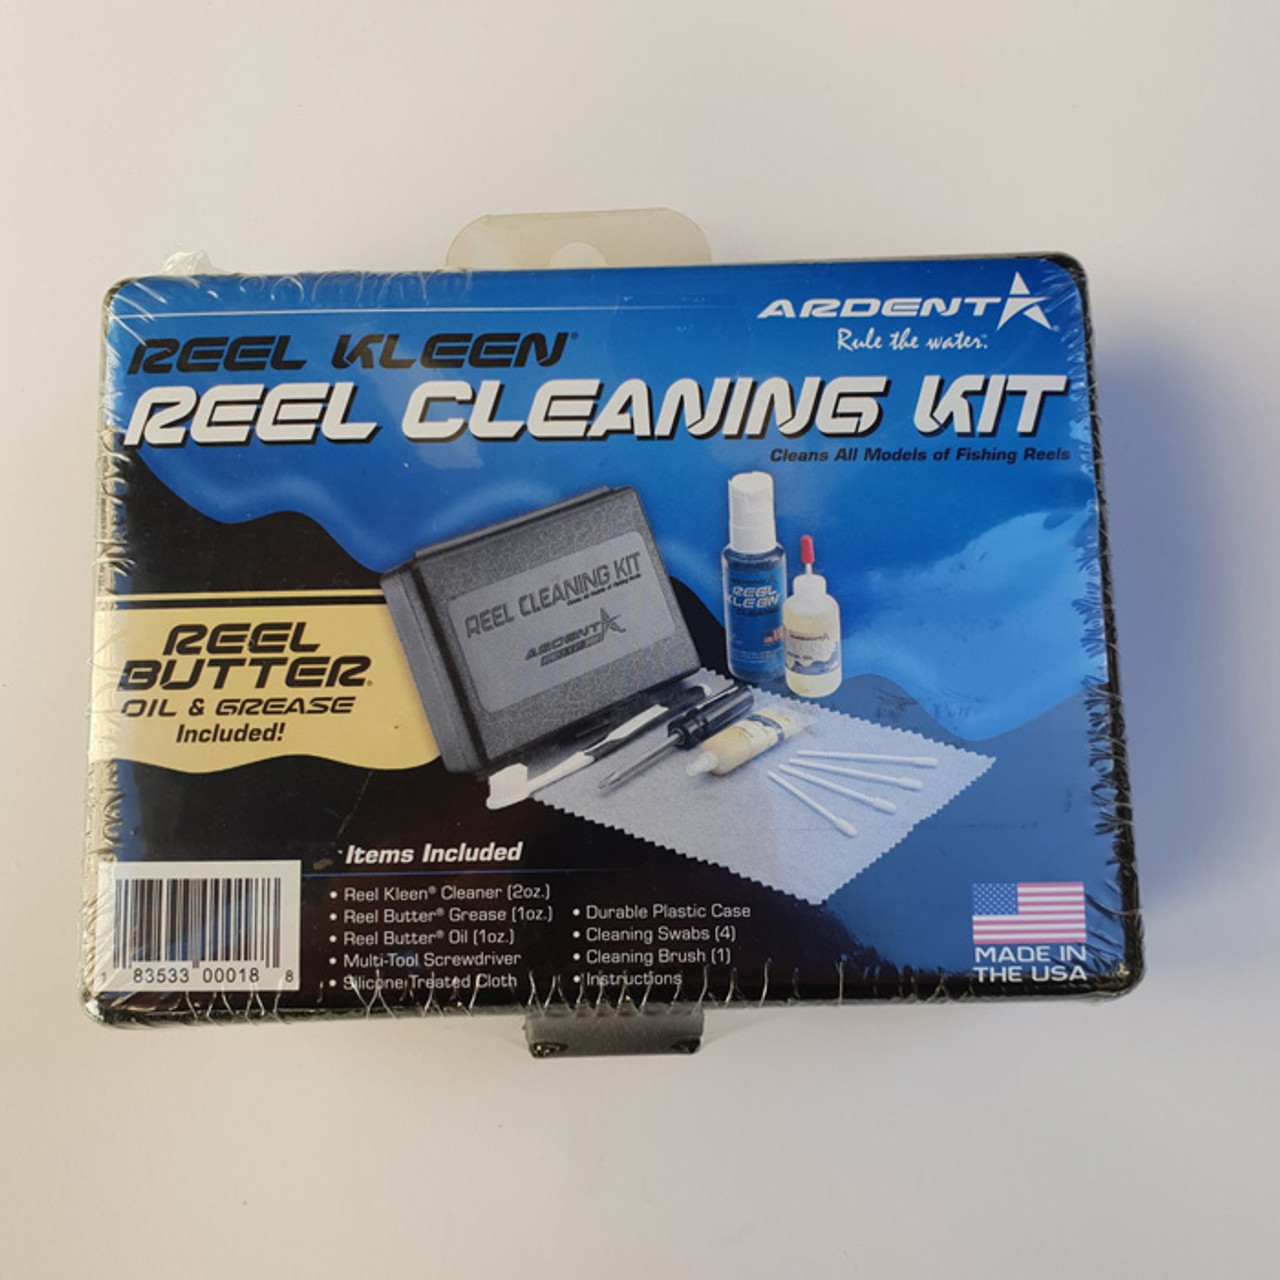 Ardent Reel Care Saltwater Kit, Reel Care Accessories 